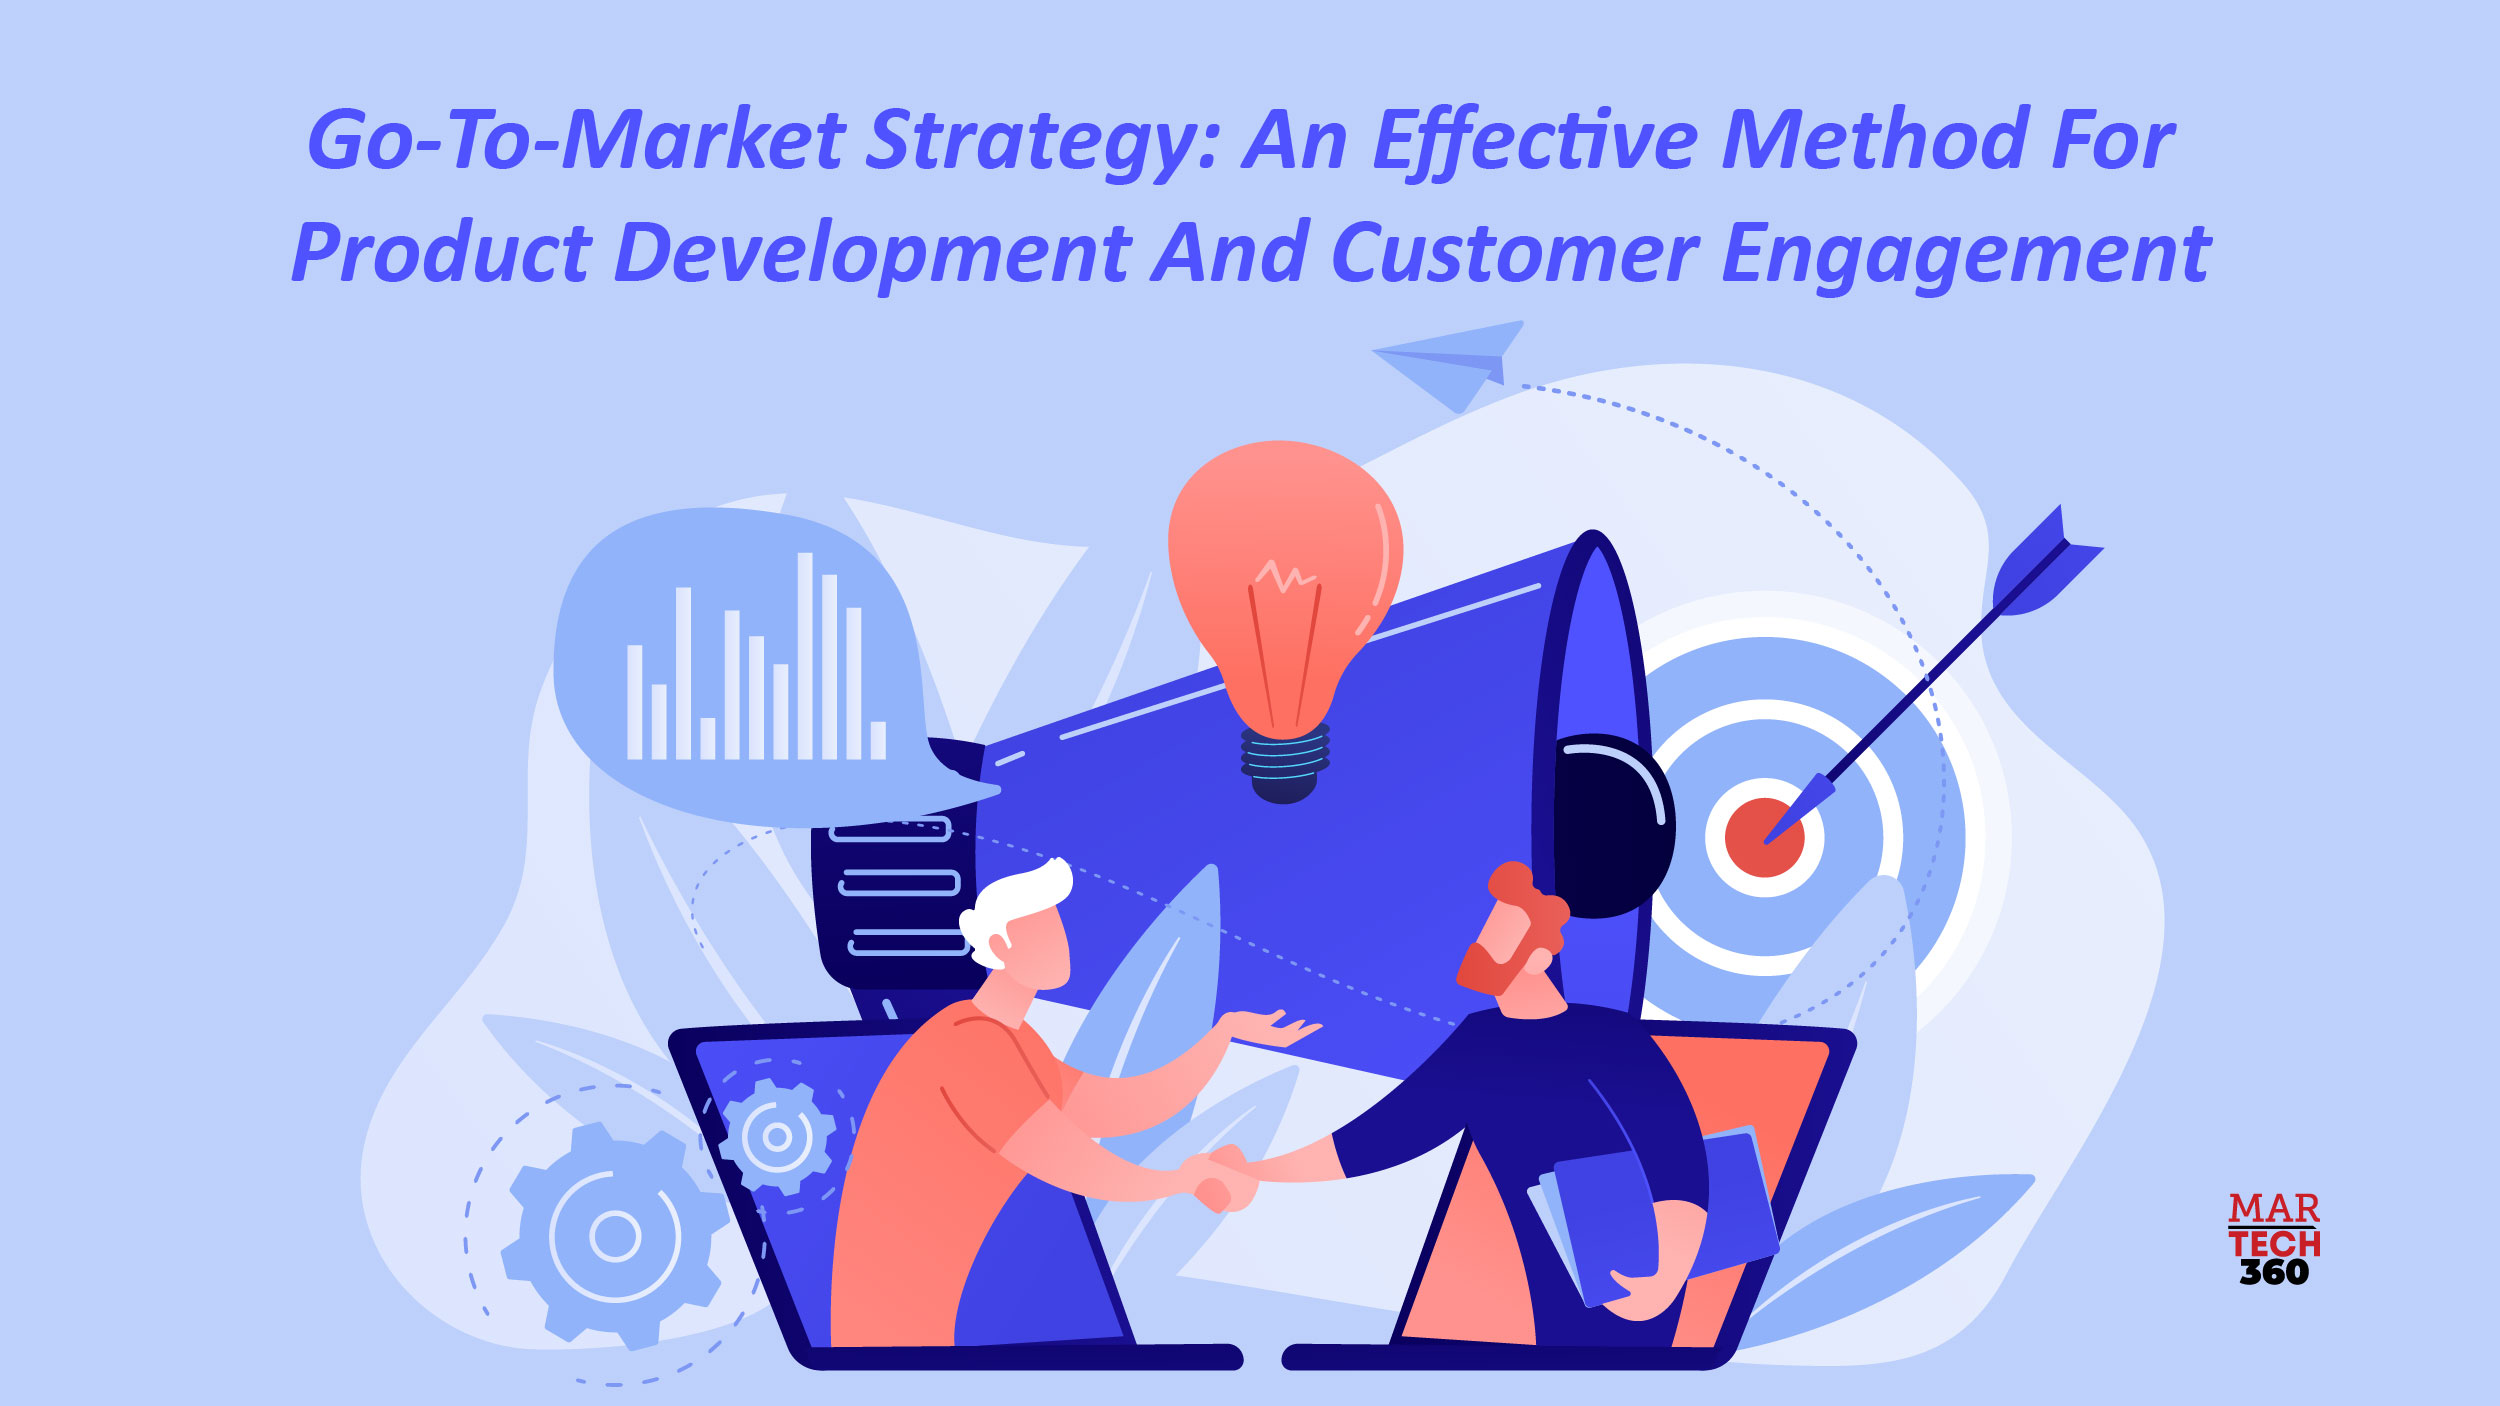 Go-To-Market Strategy An Effective Method For Product Development And Customer Engagement